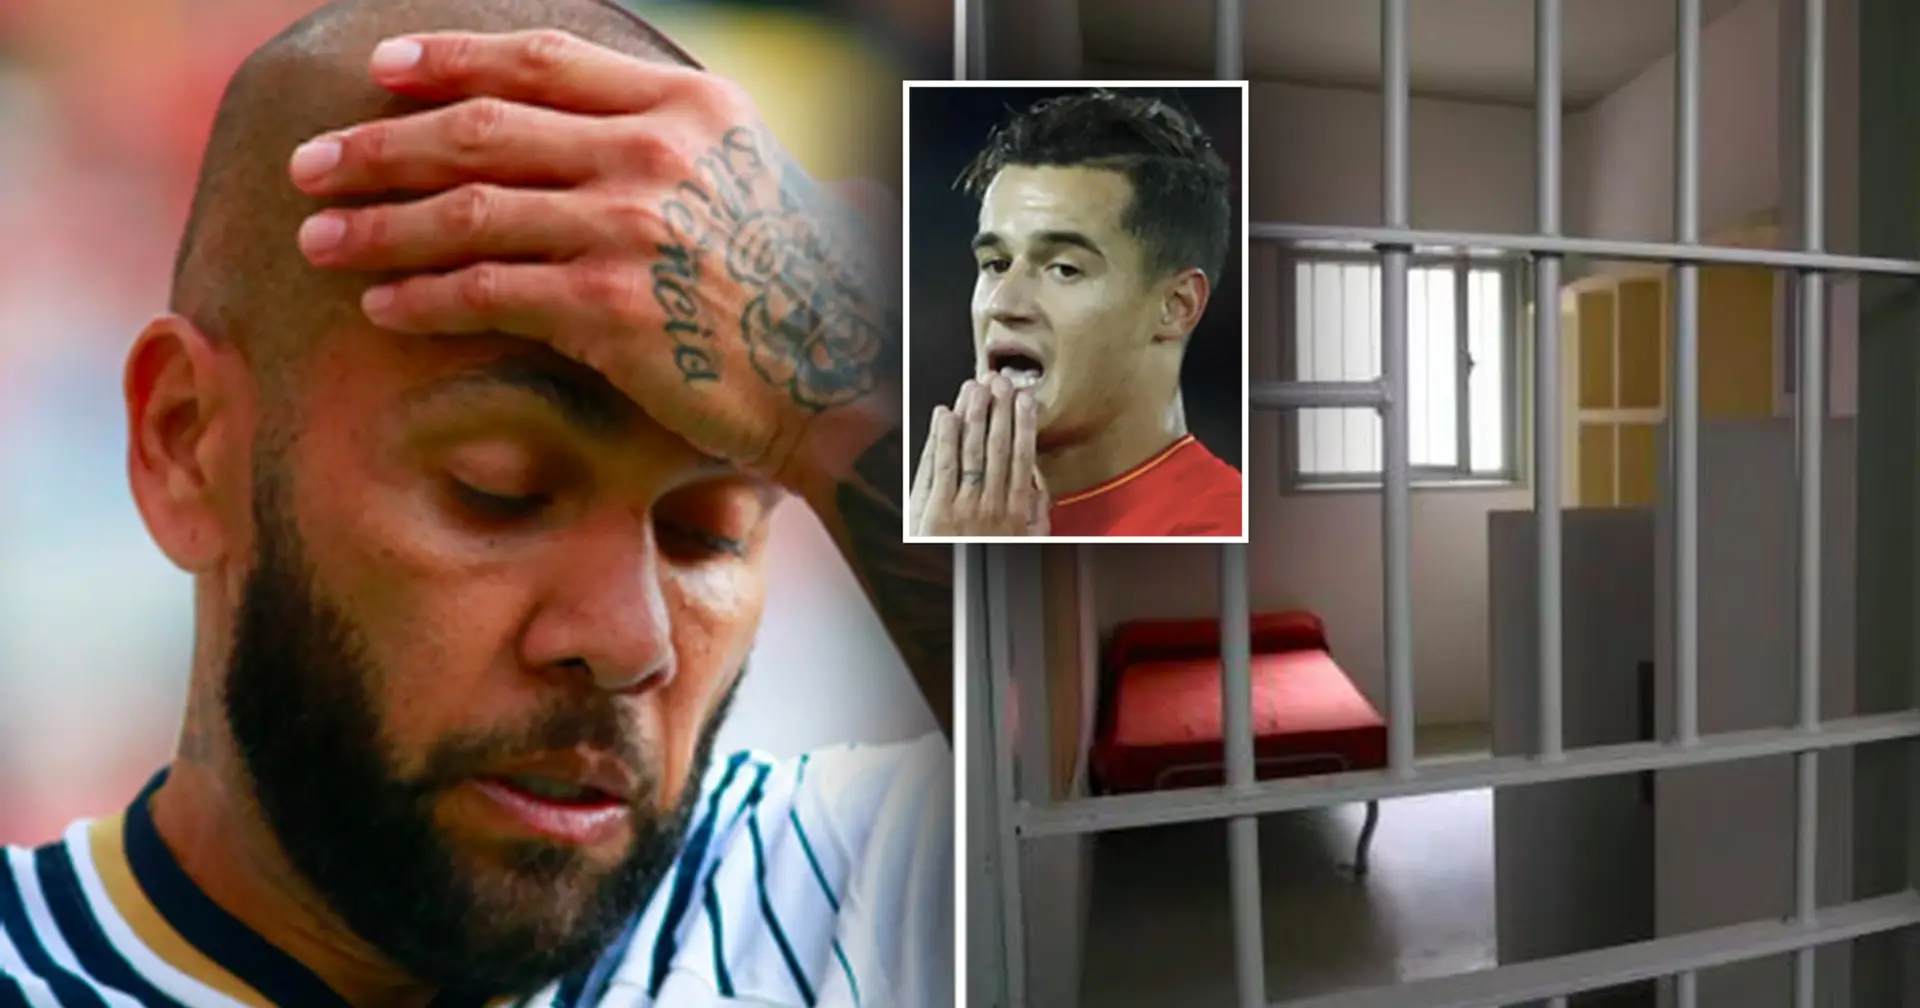 Dani Alves reportedly shares prison cell with Brazilian called Coutinho